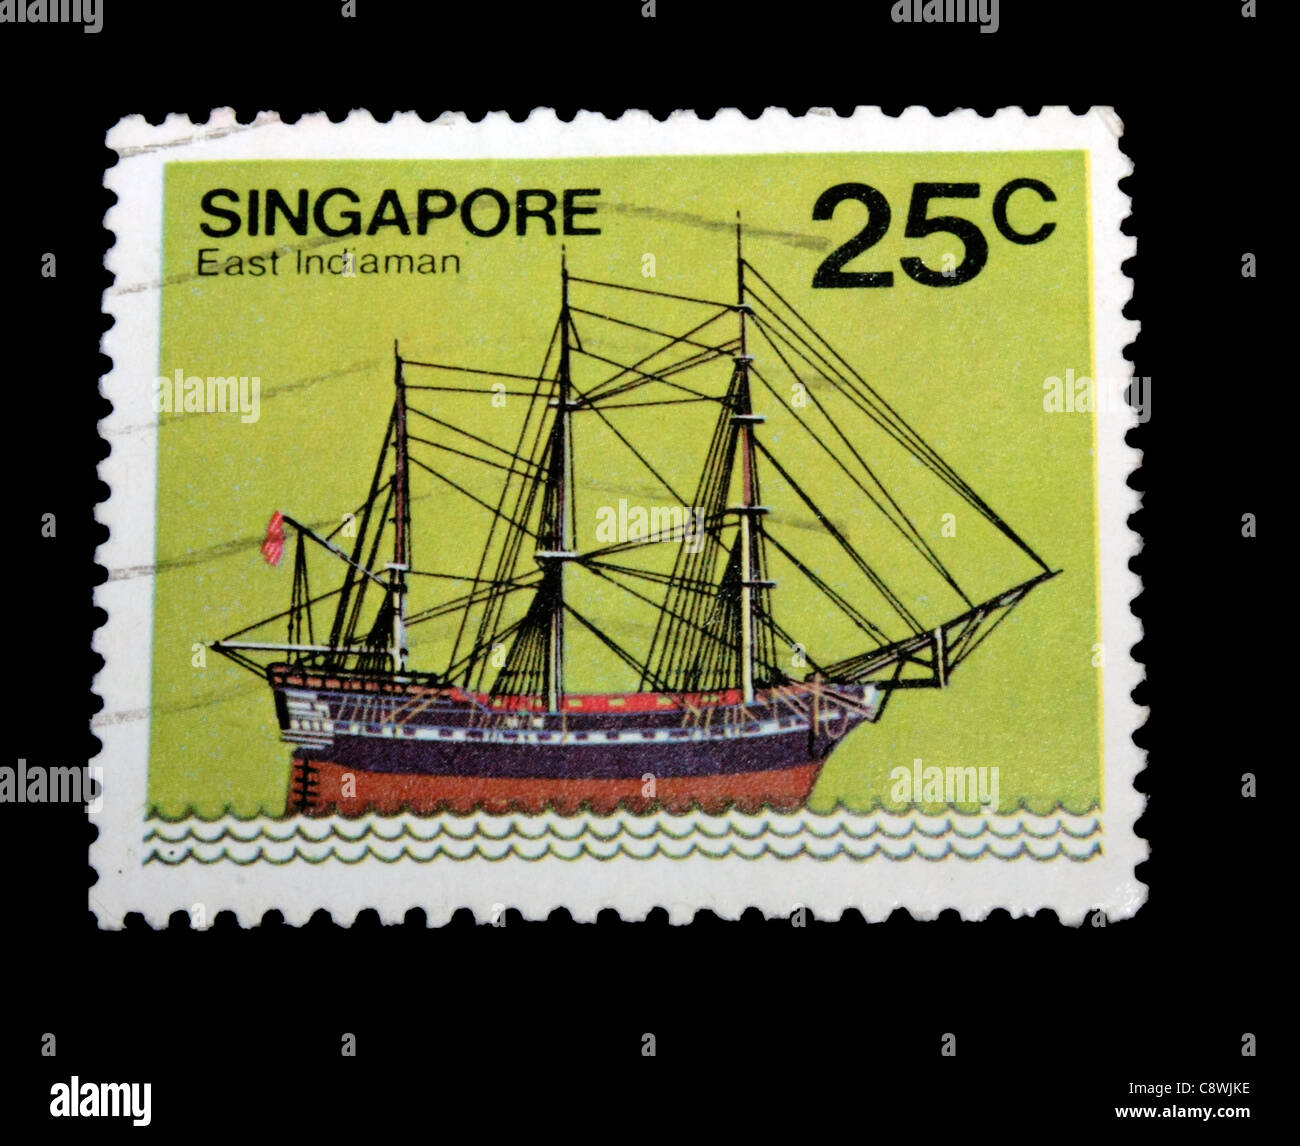 A postage stamp of Singapore in black background Stock Photo